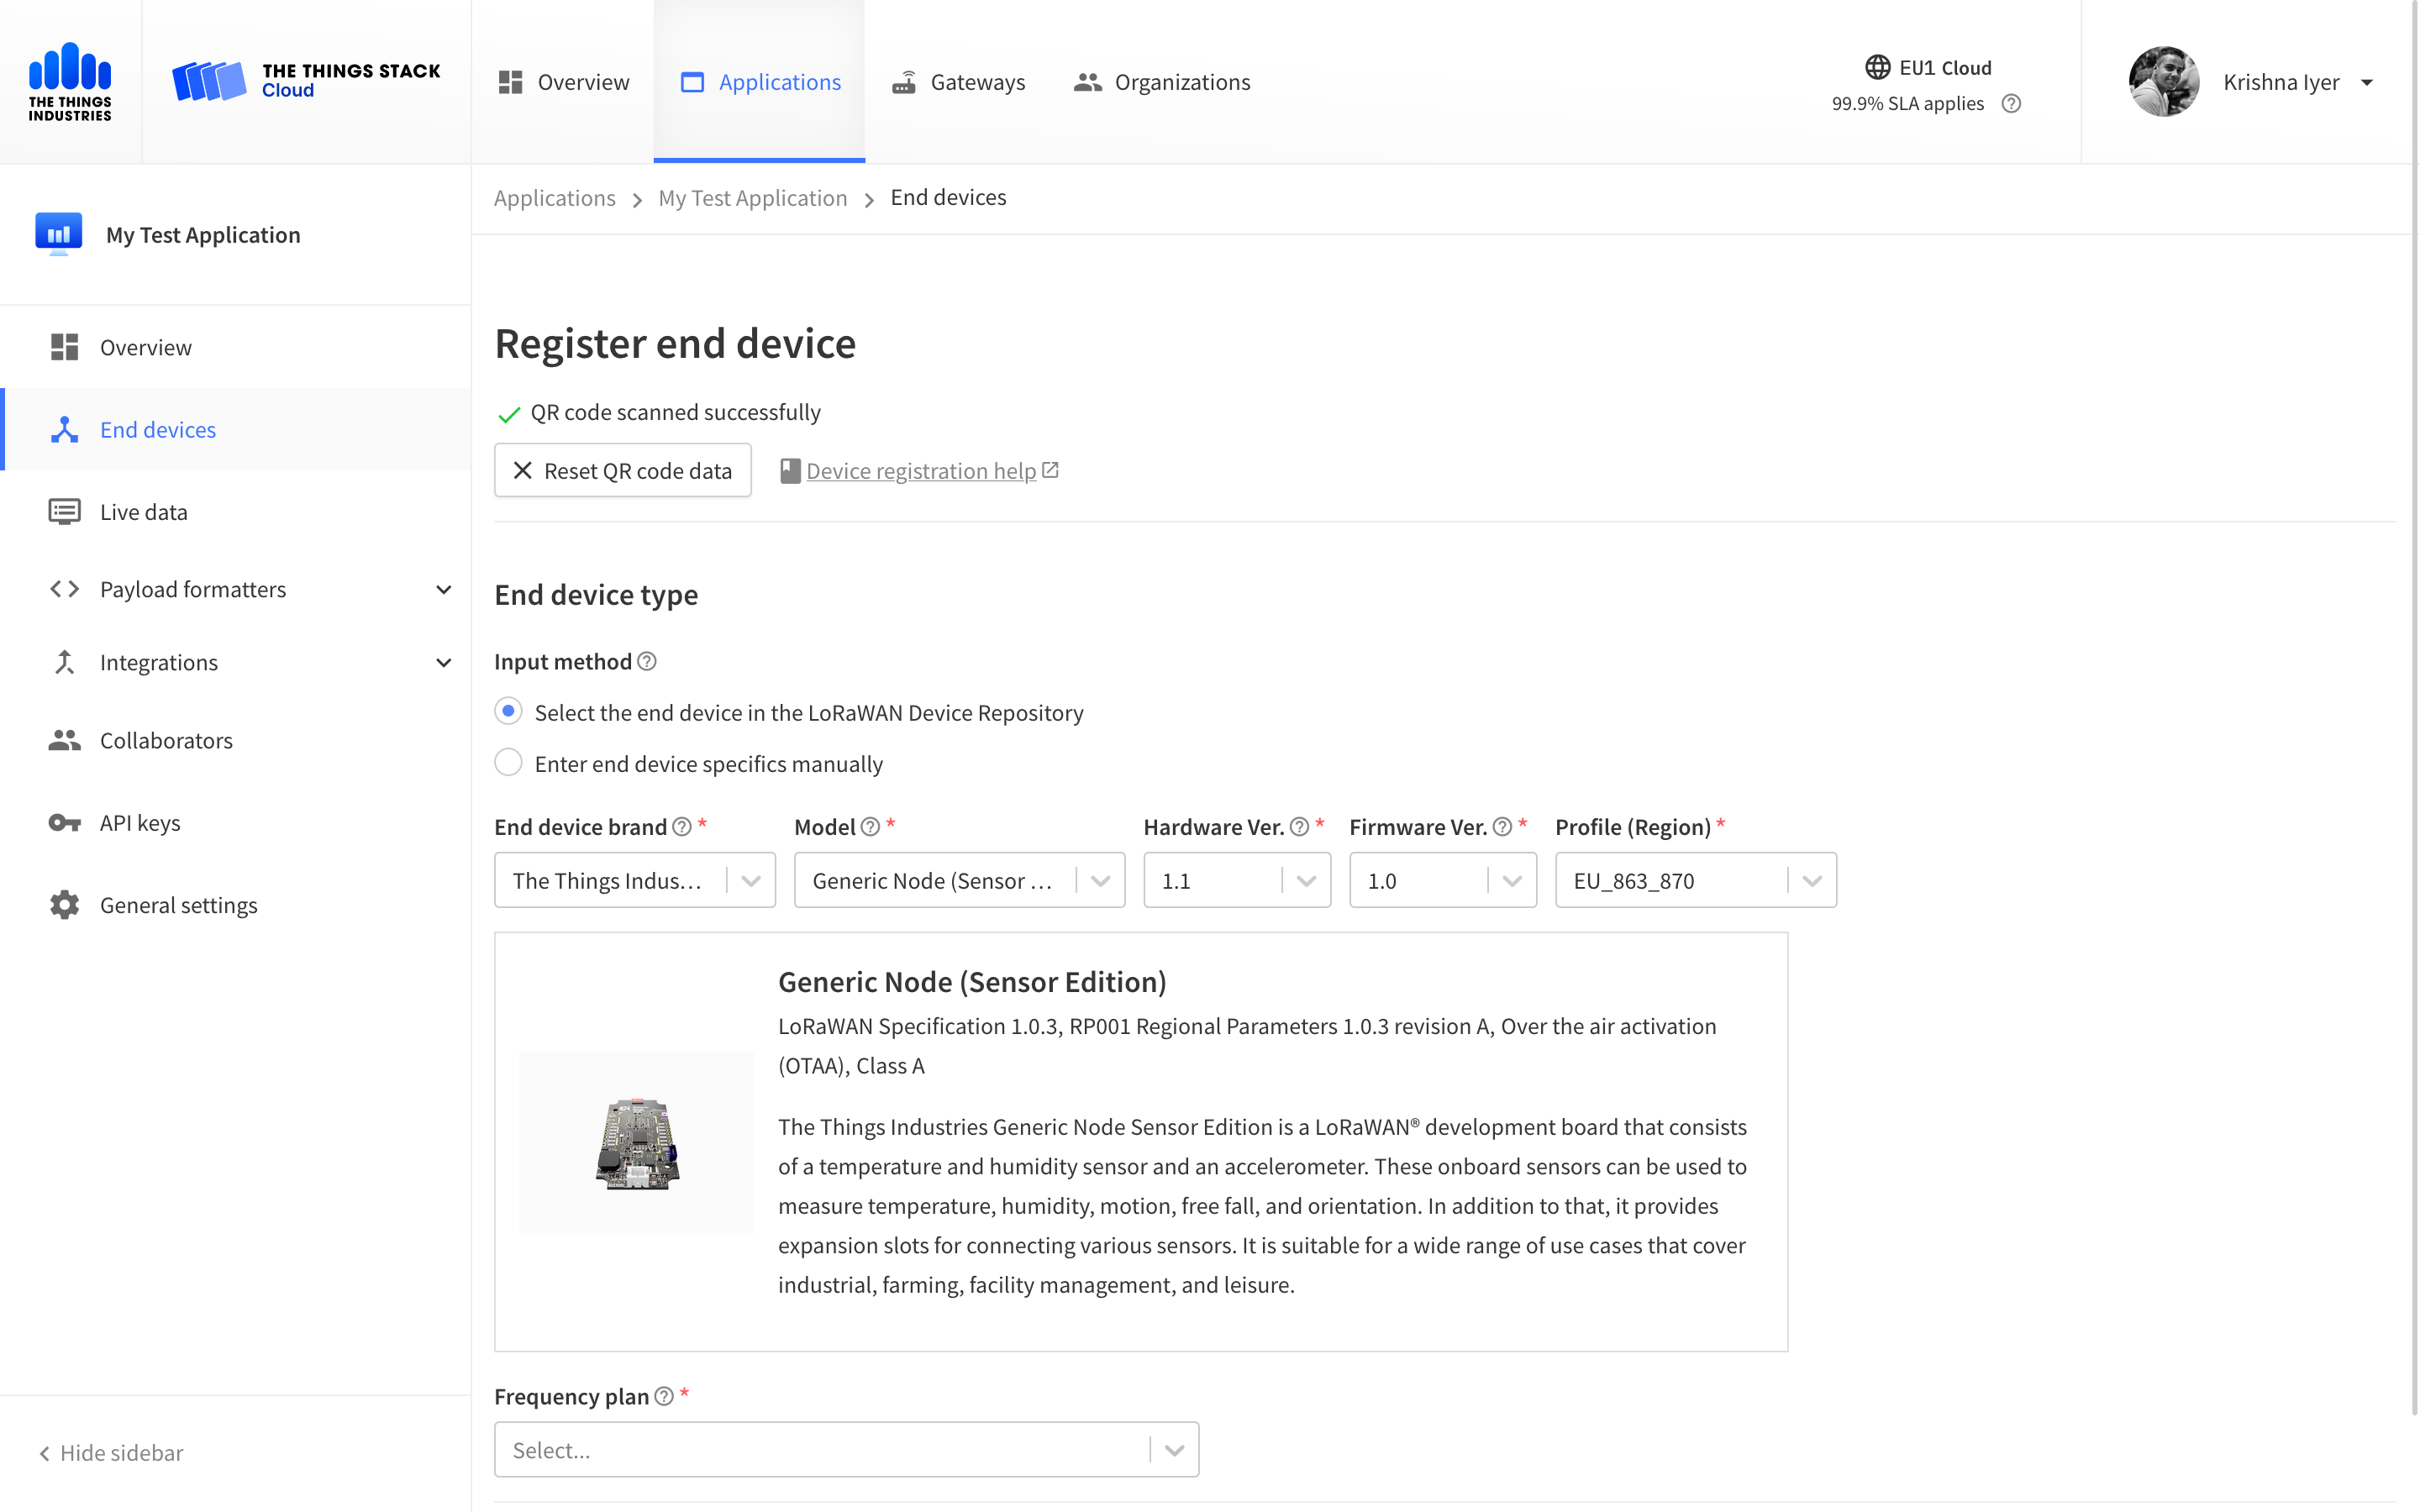 Creating a new device with the Device Repository